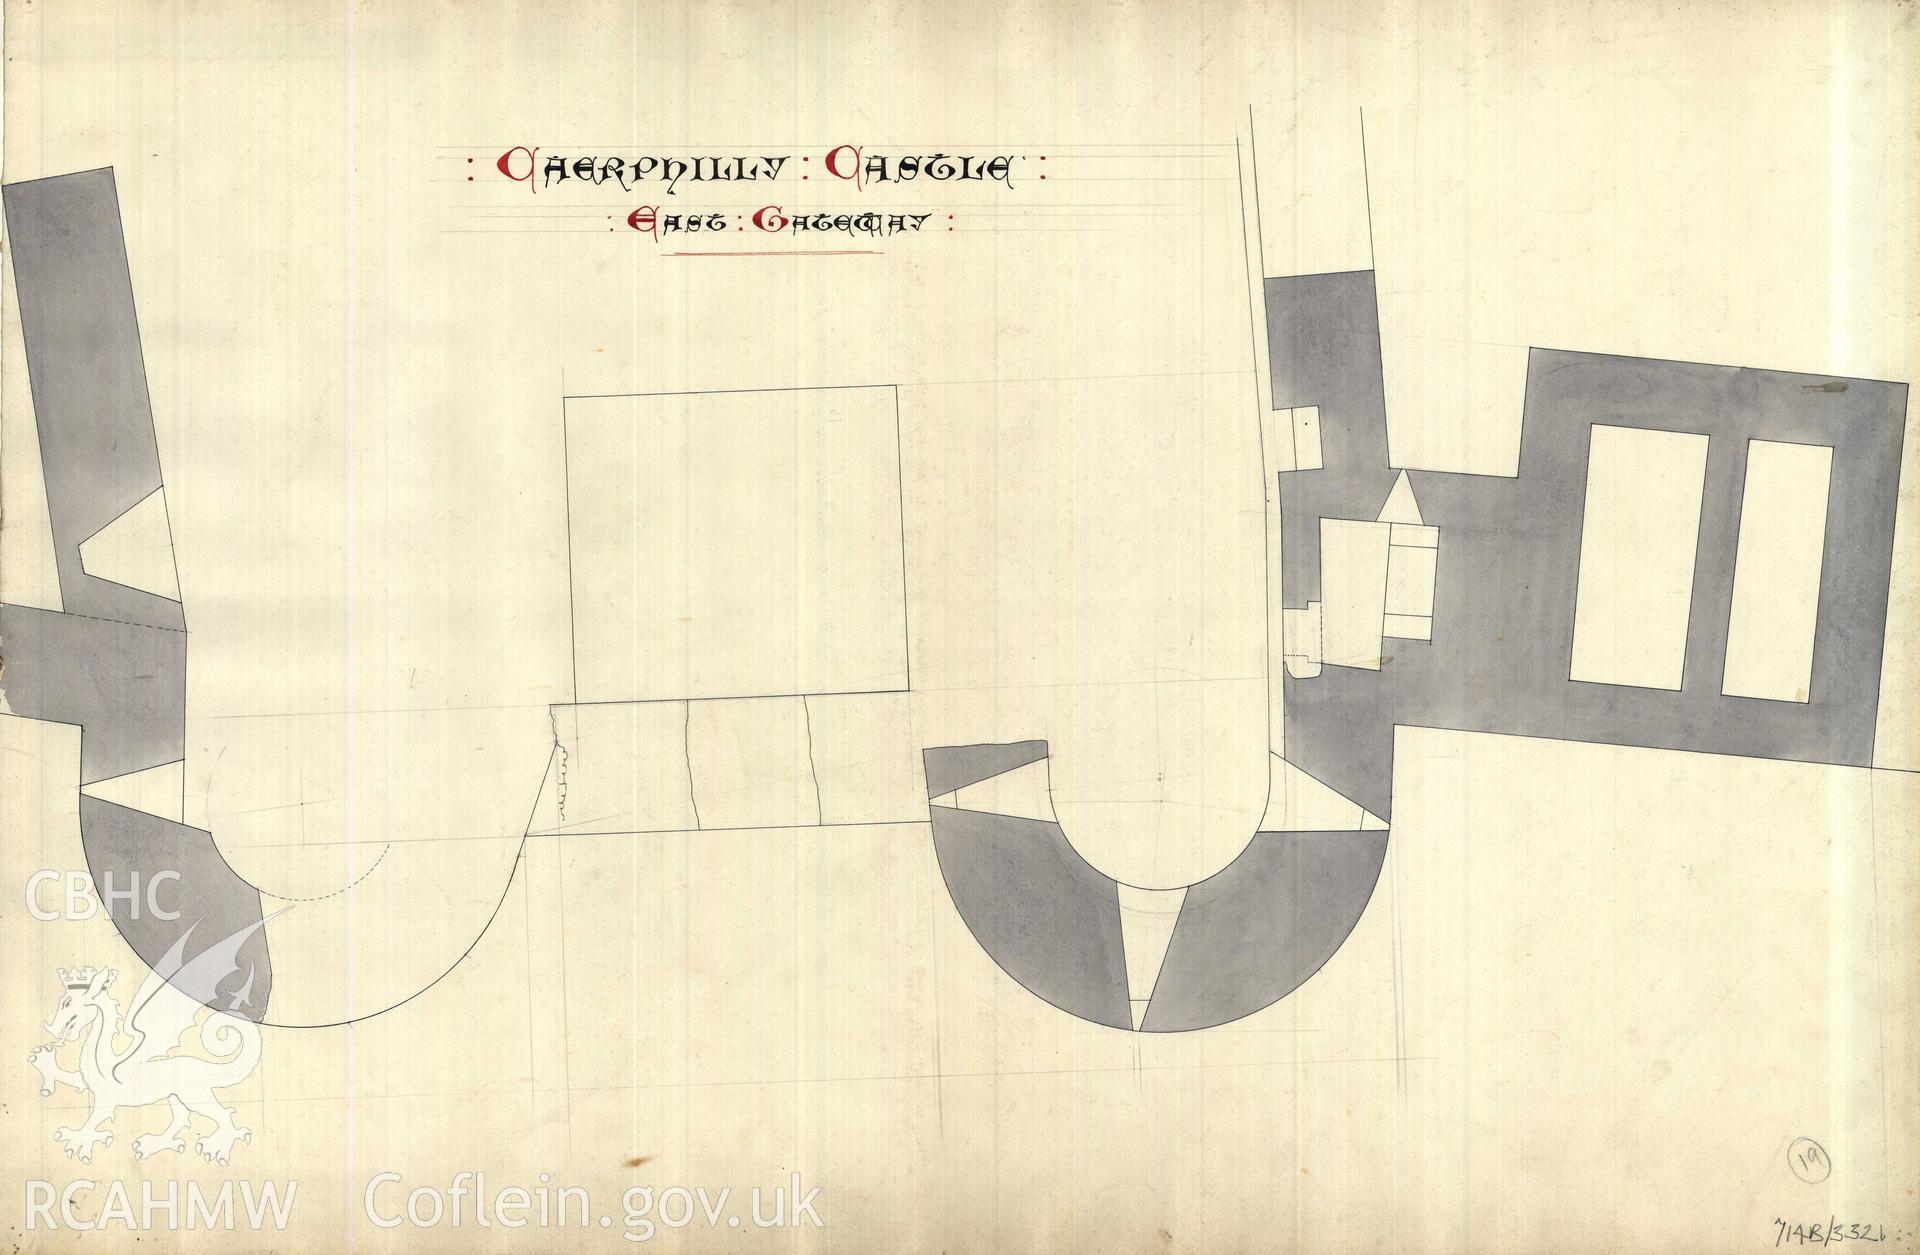 Cadw guardianship monument drawing of Caerphilly Castle. Mid E gate, ground plan (ii). Cadw Ref. No:714B/332b. Scale 1:24.